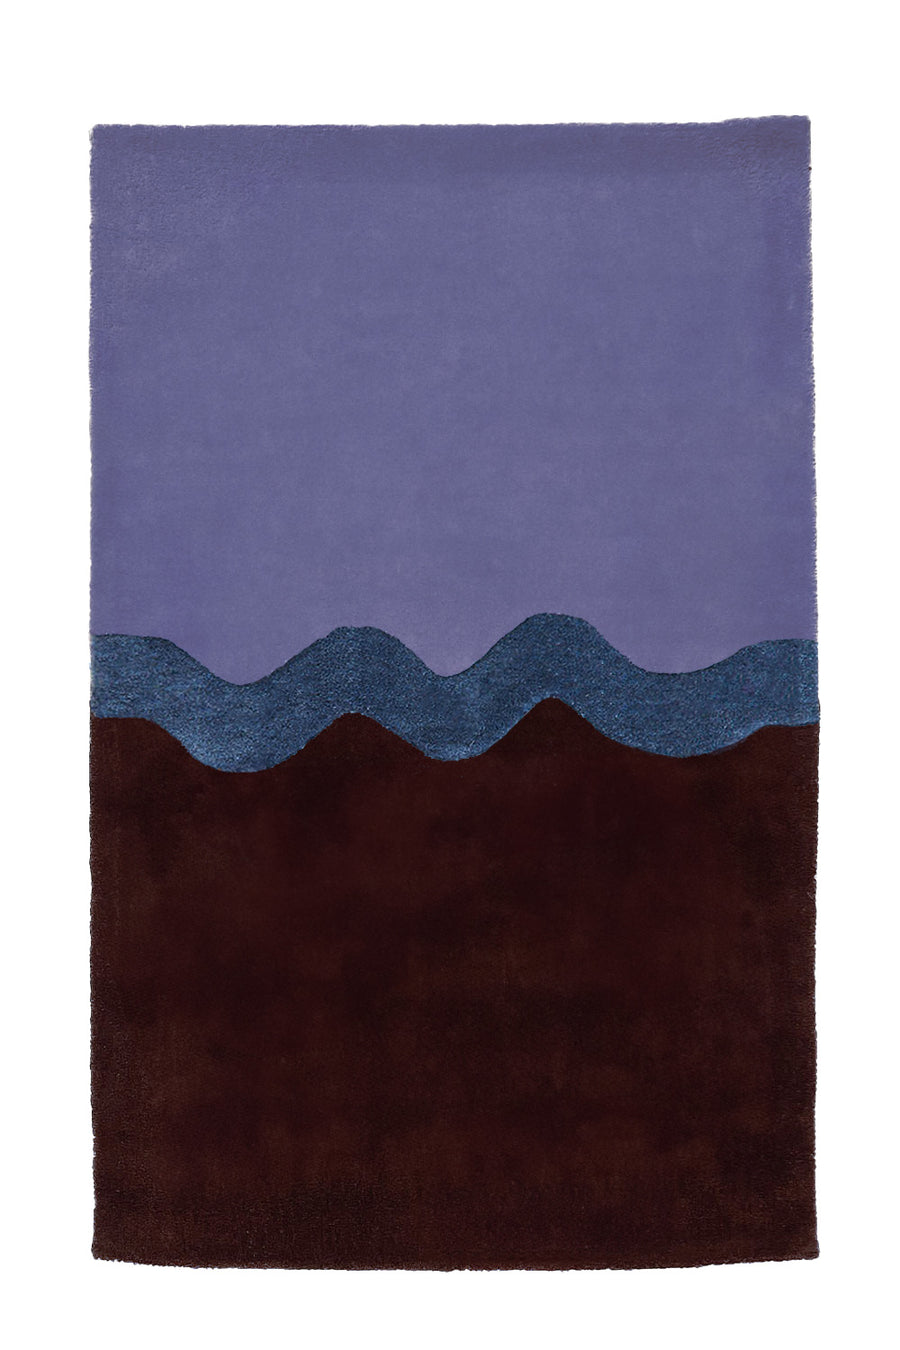 Neapolitan Blue and Brown Tufted Rug